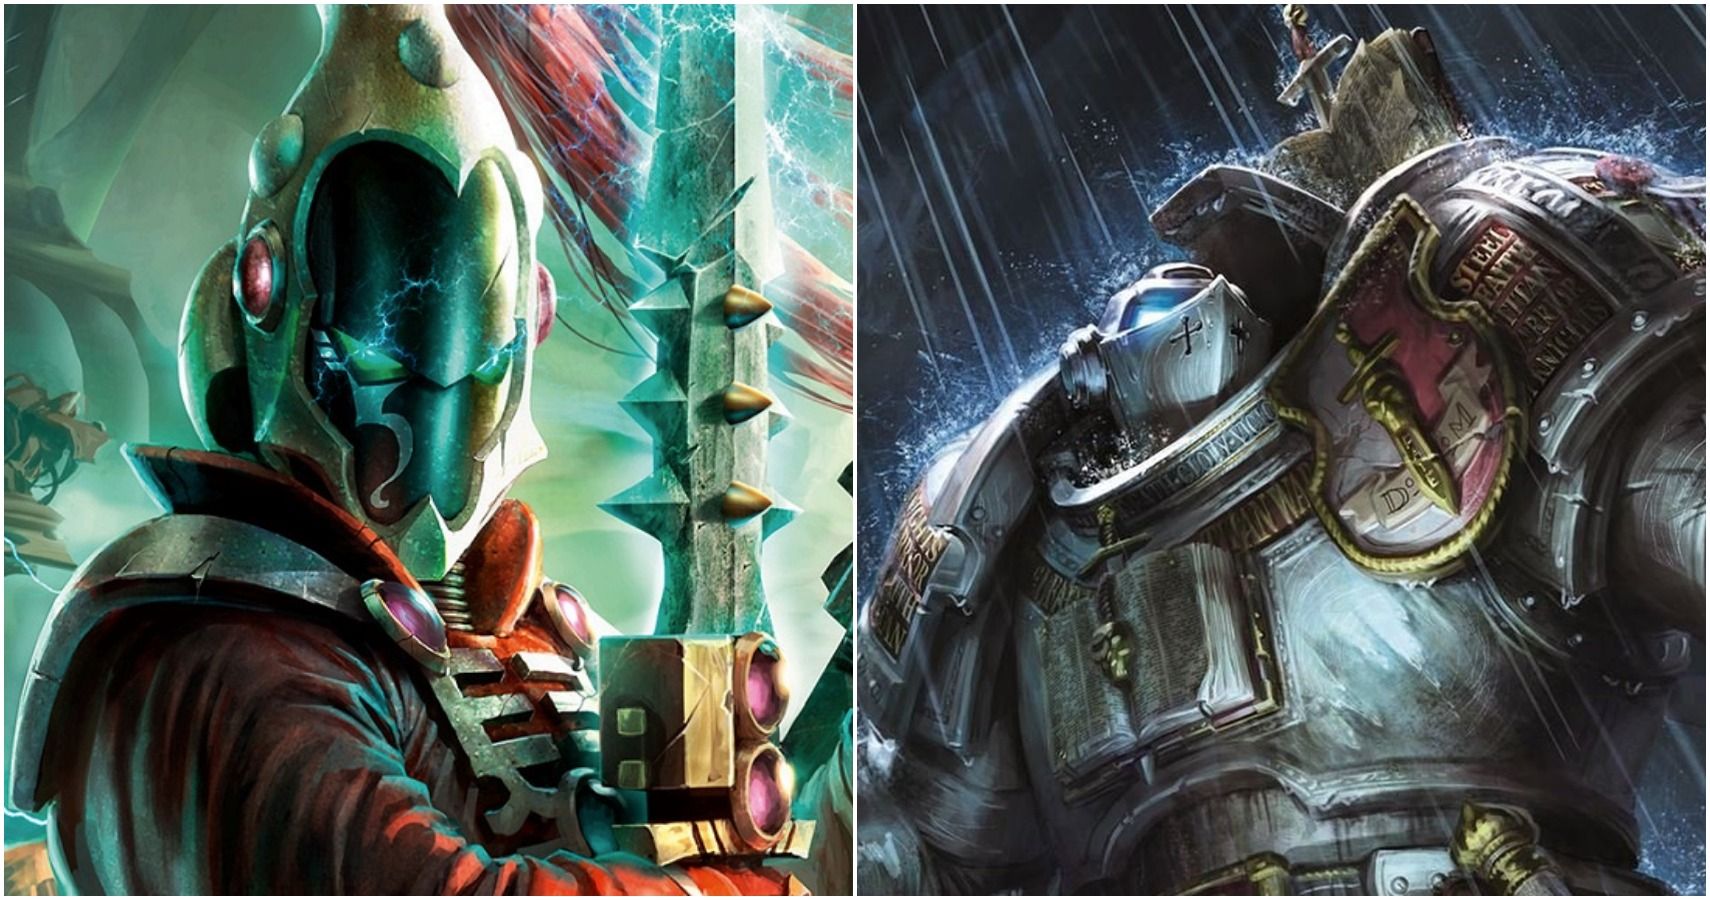 Are there any factions with strong psychic powers in Warhammer 40K?